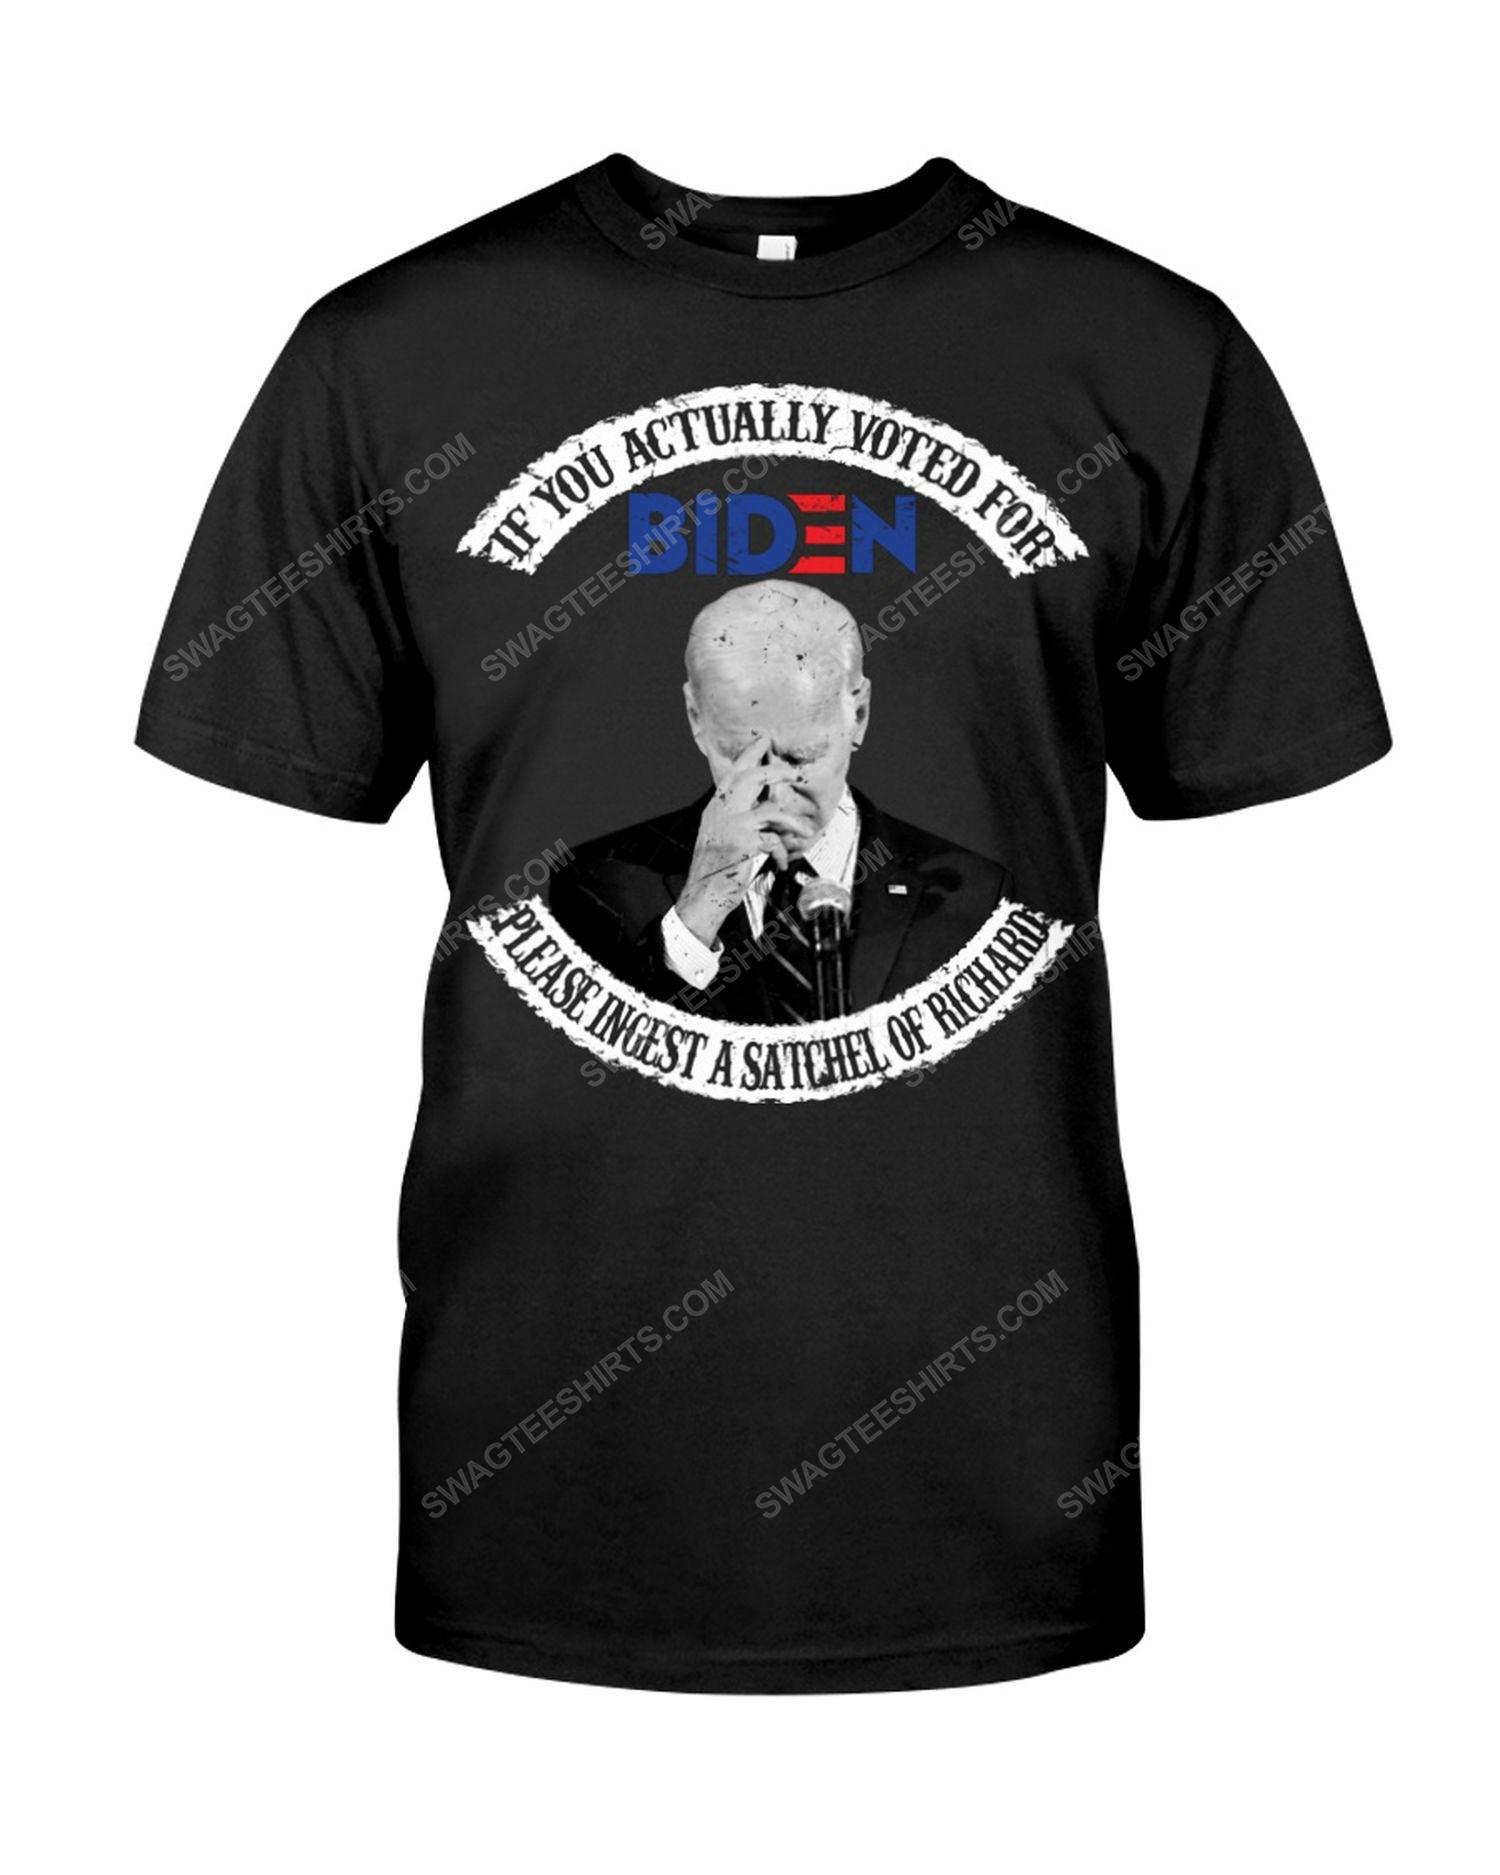 If you actually voted for biden please ingest a satchel of richards political tshirt